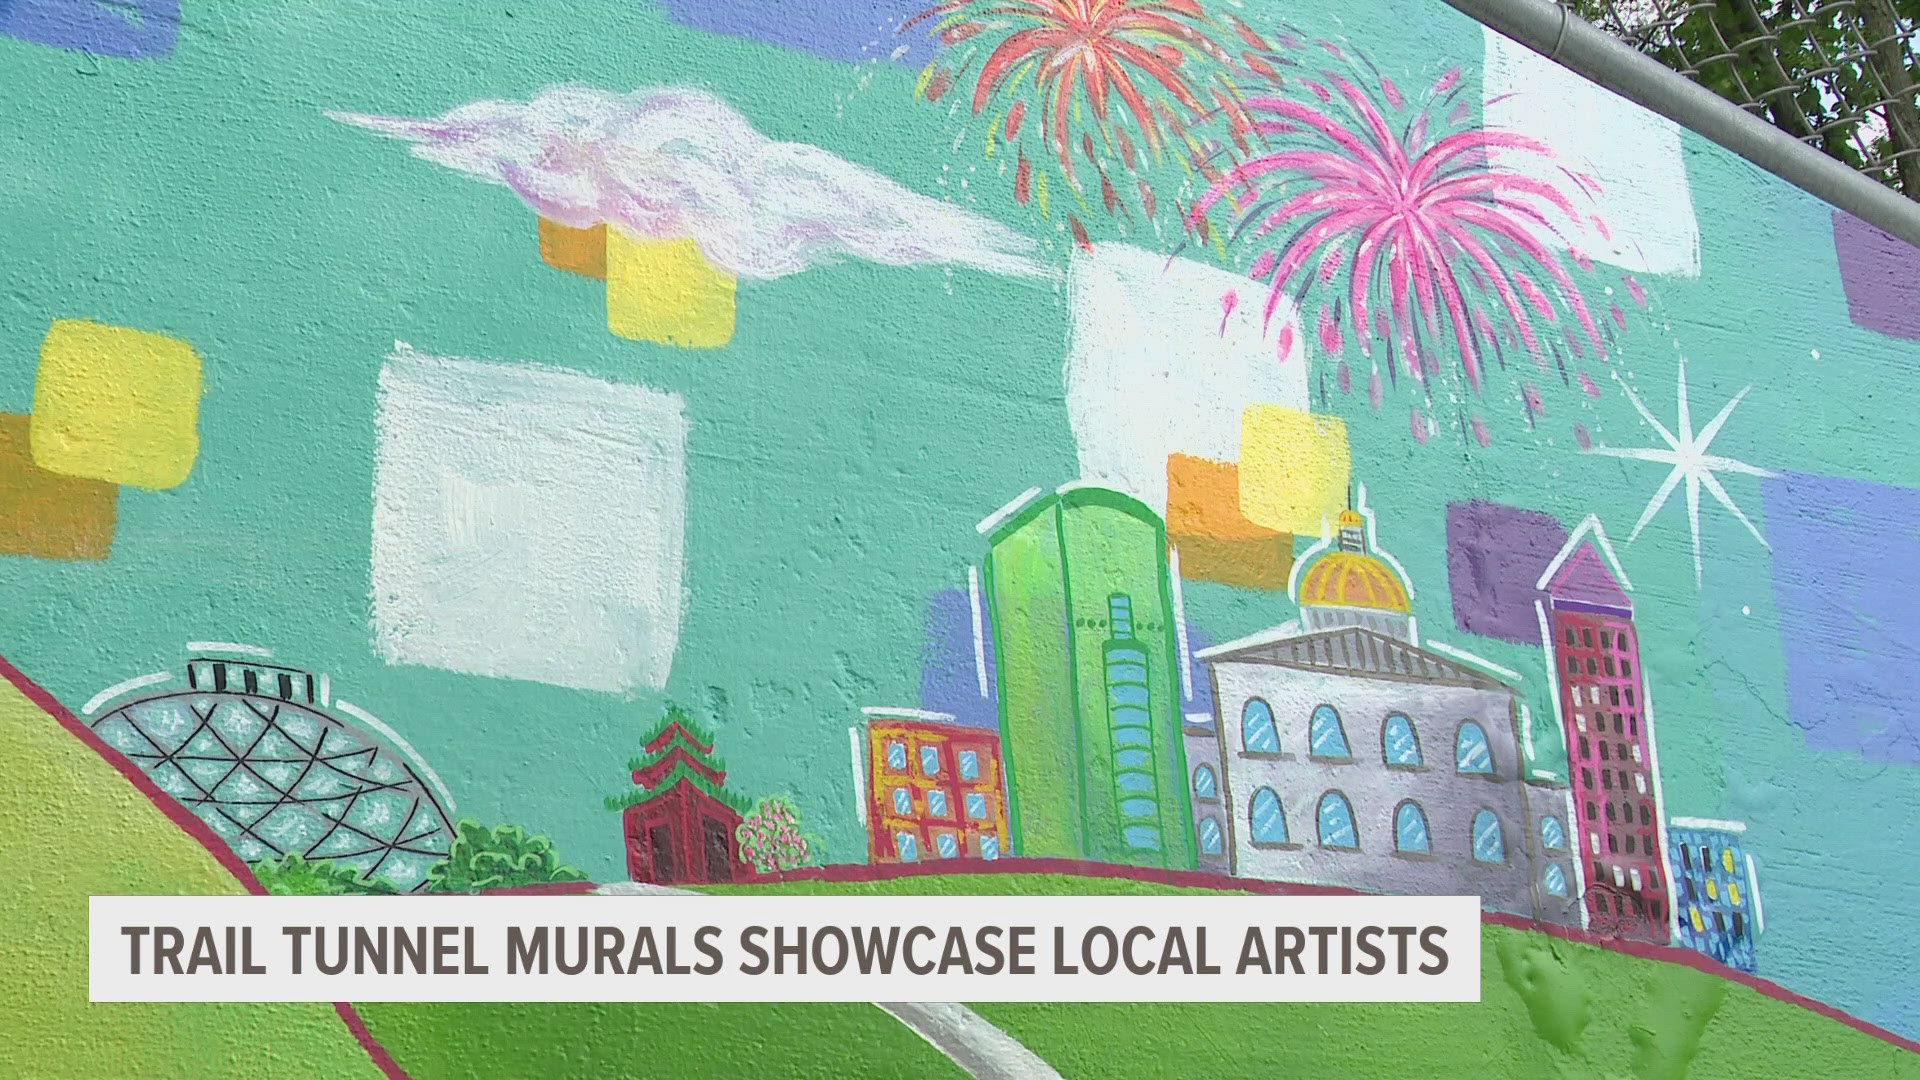 The city of West Des Moines is showcasing local artists through temporary mural inside five tunnels on Jordan Creek Trail.